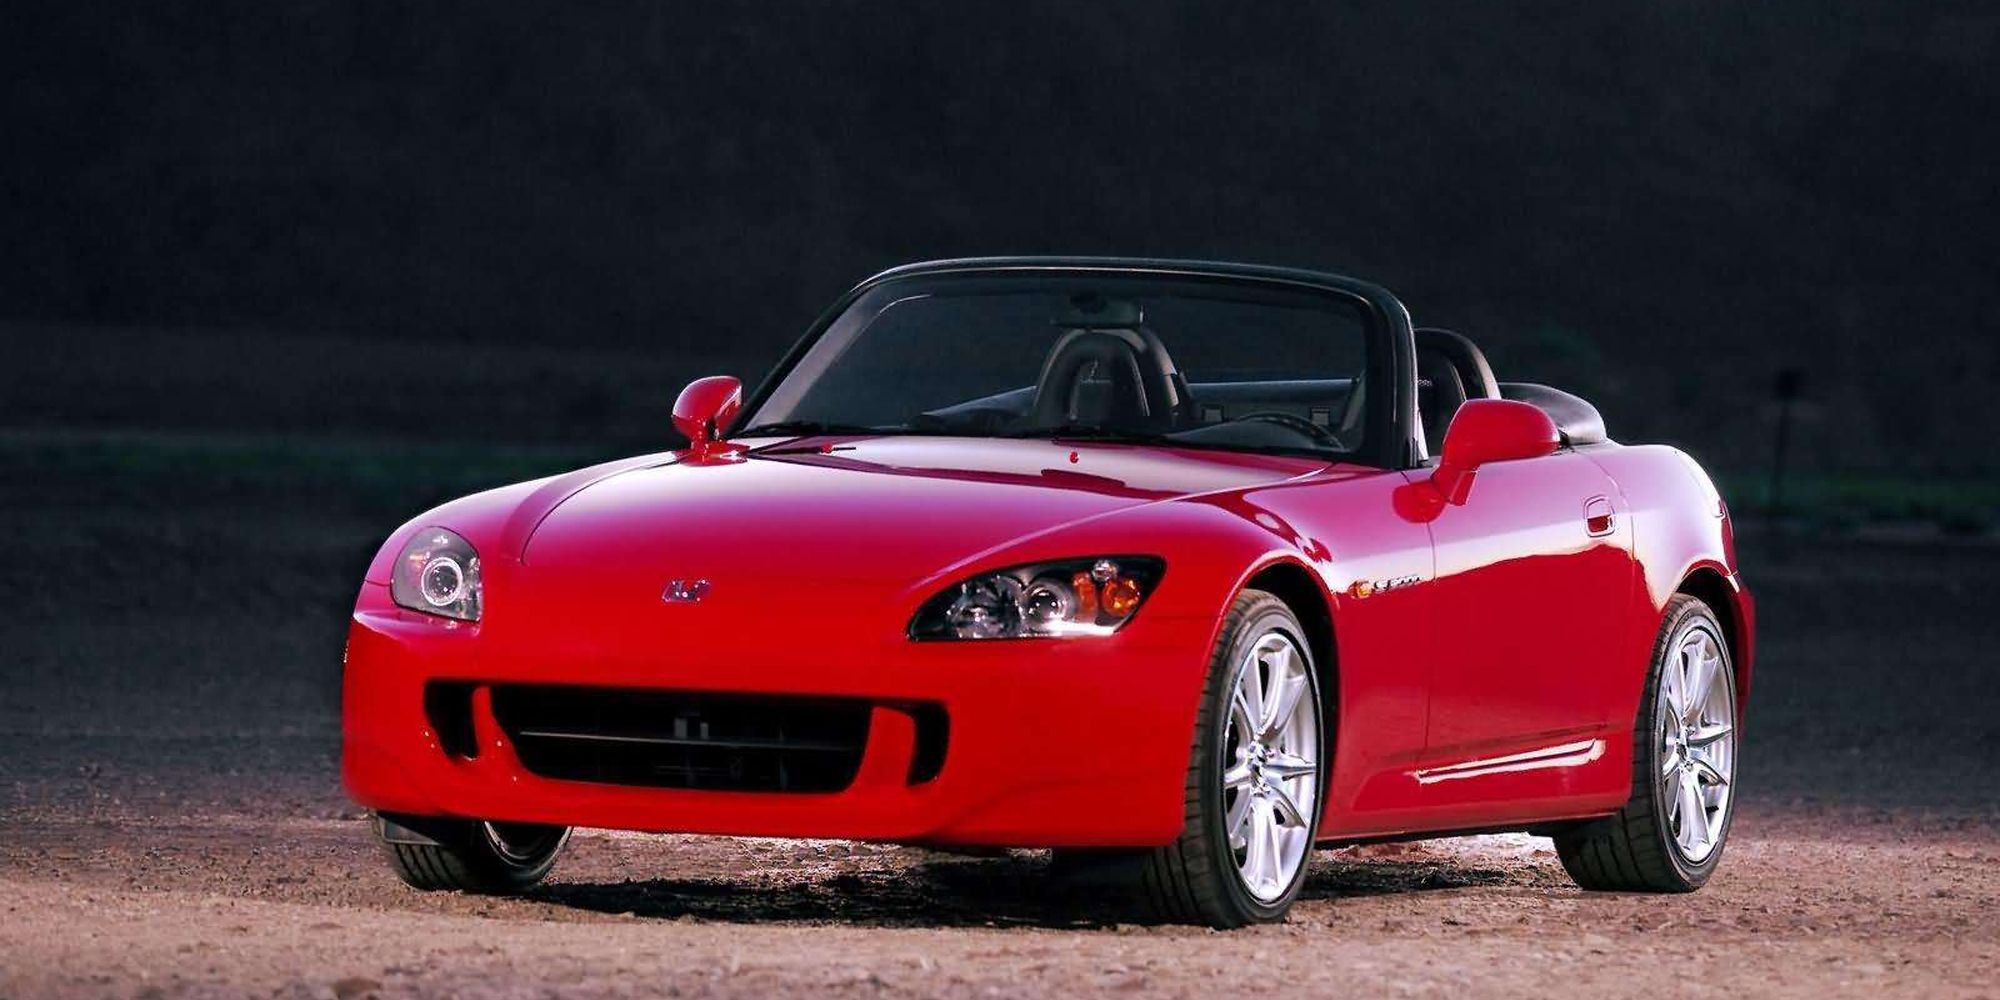 The front of a red AP2 S2000